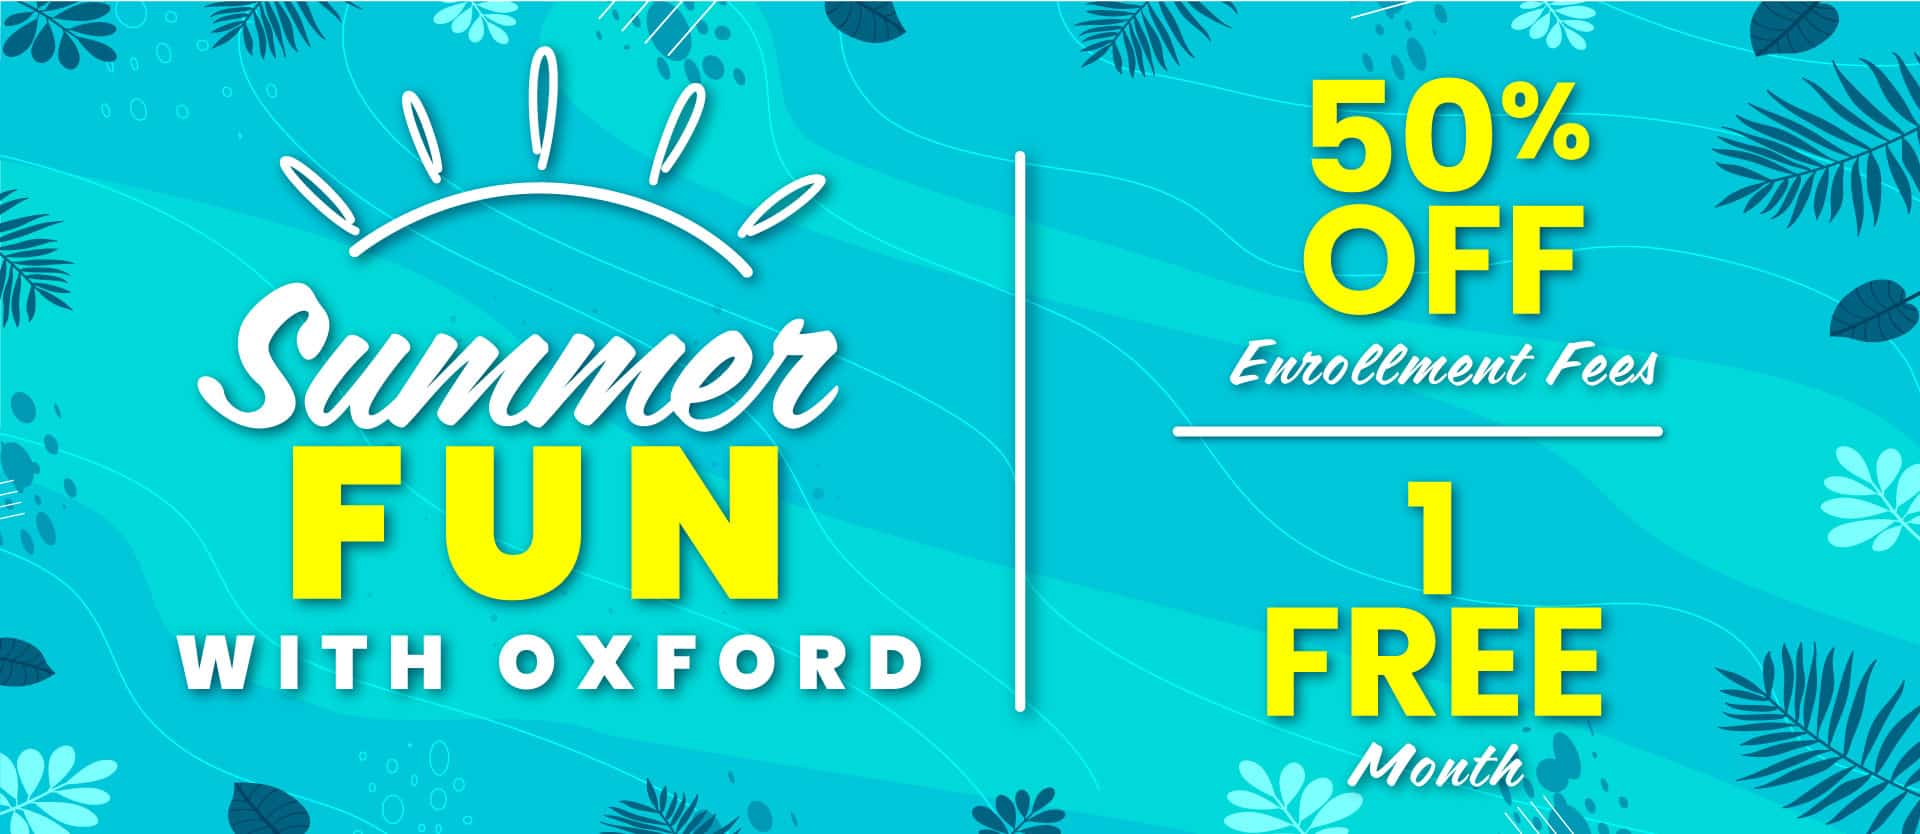 Summer Fun with Oxford August Promo Info